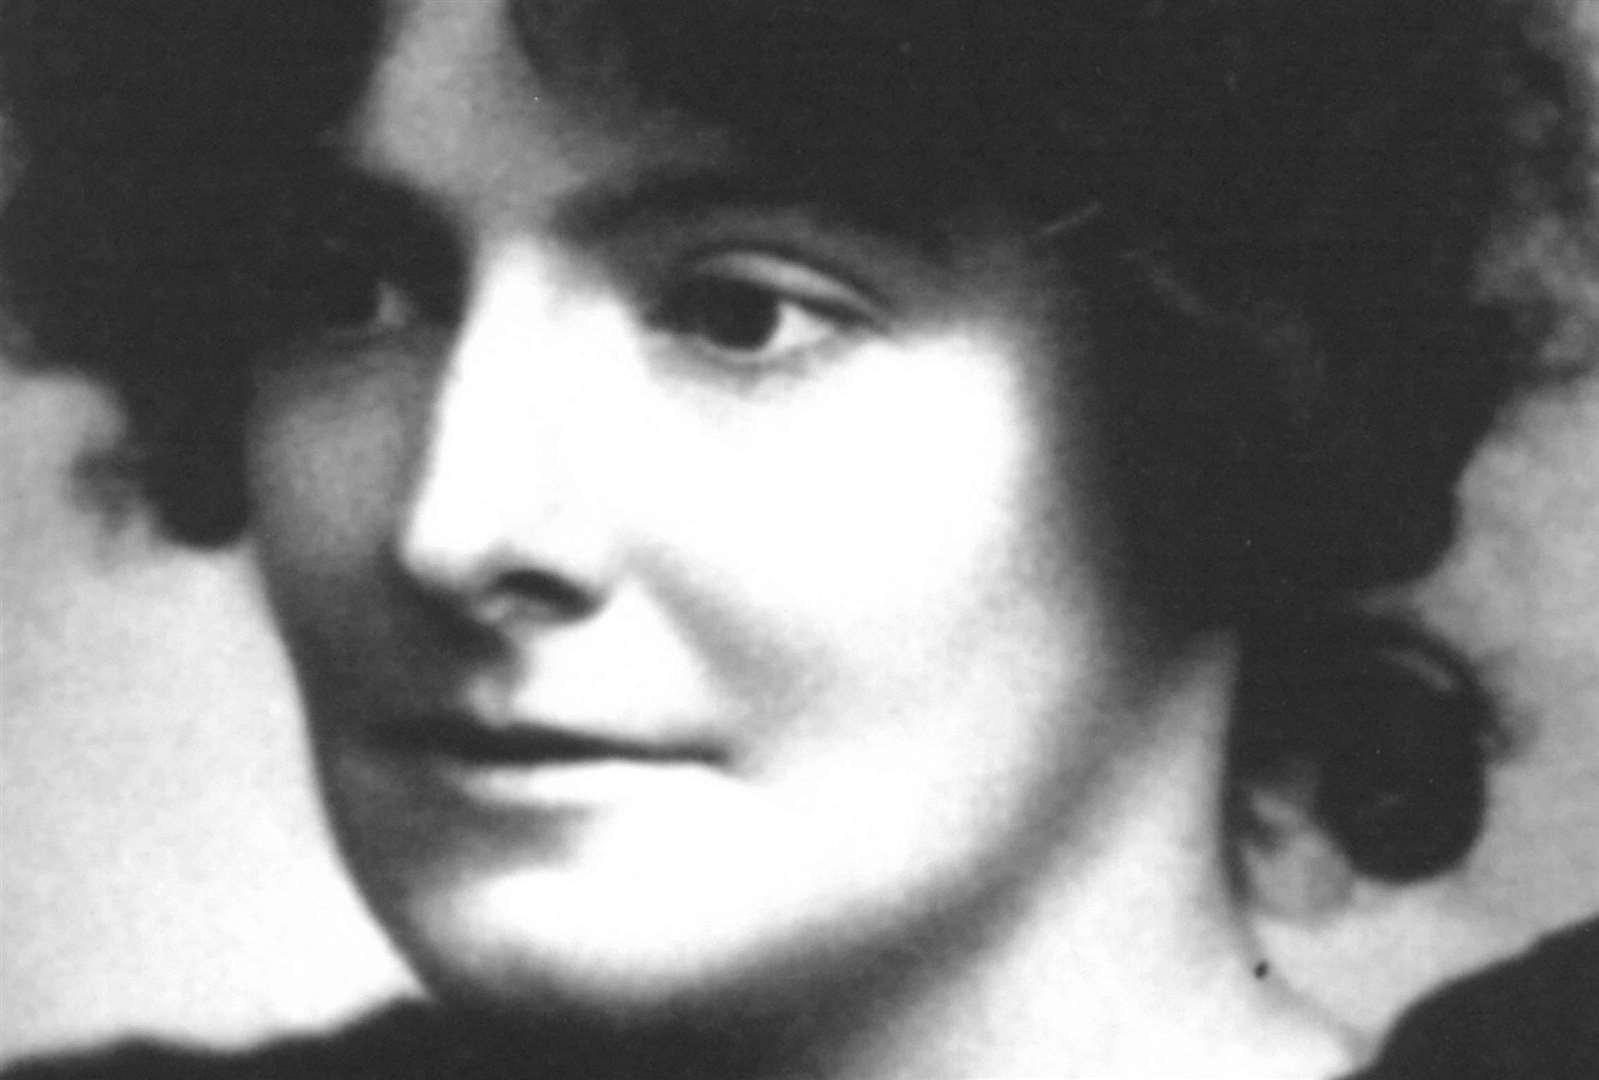 Edith Nesbit became one of the most acclaimed children’s authors